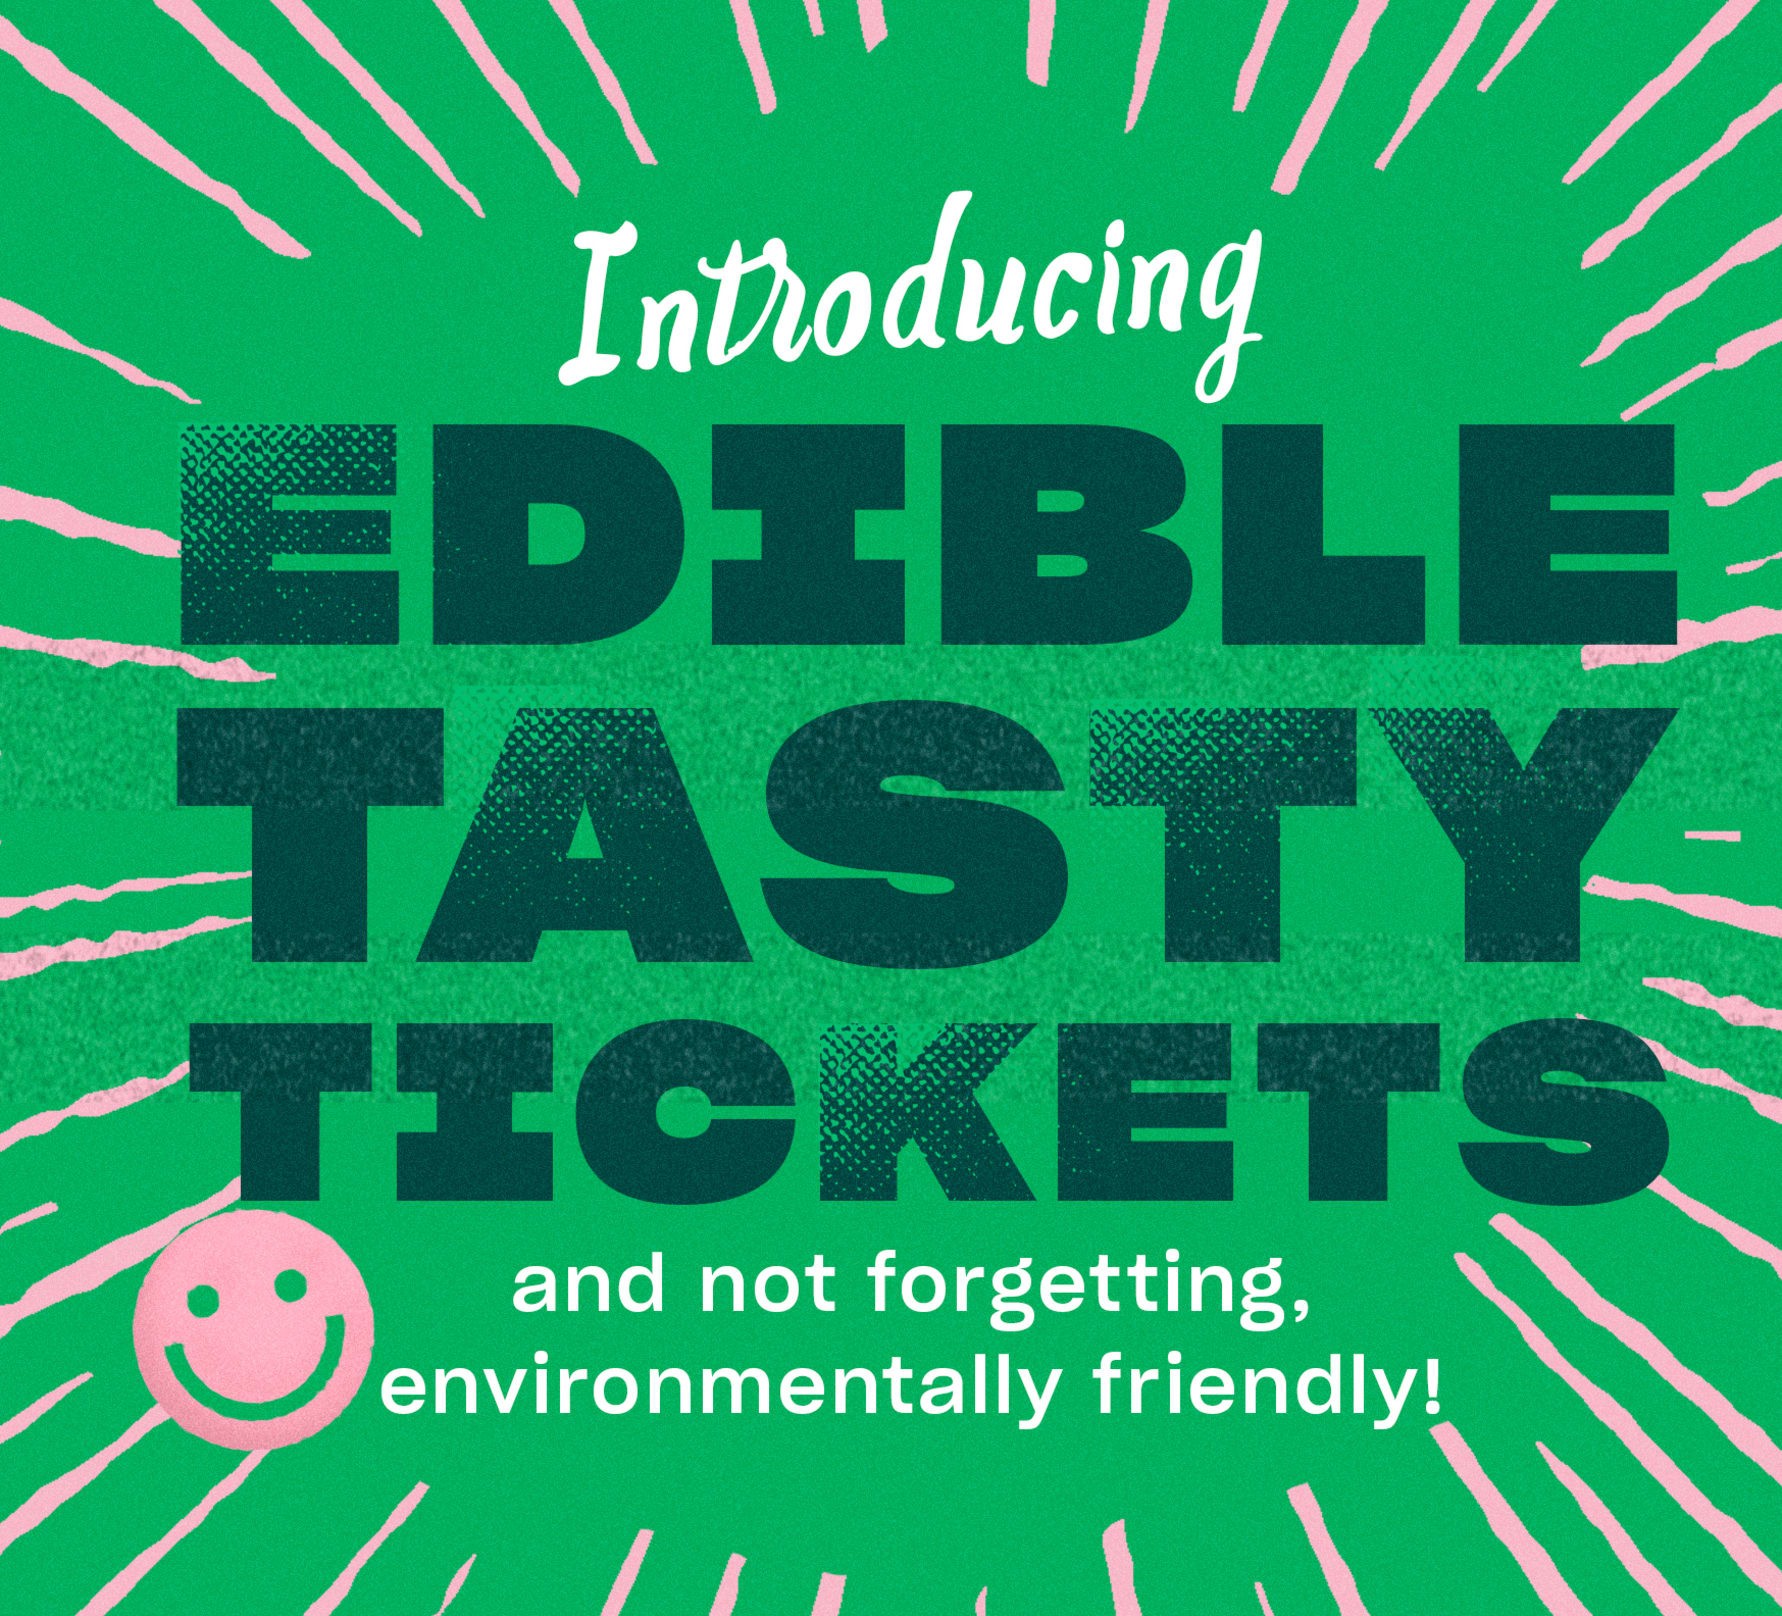 Edible tickets now available for London Northwestern Railway passengers